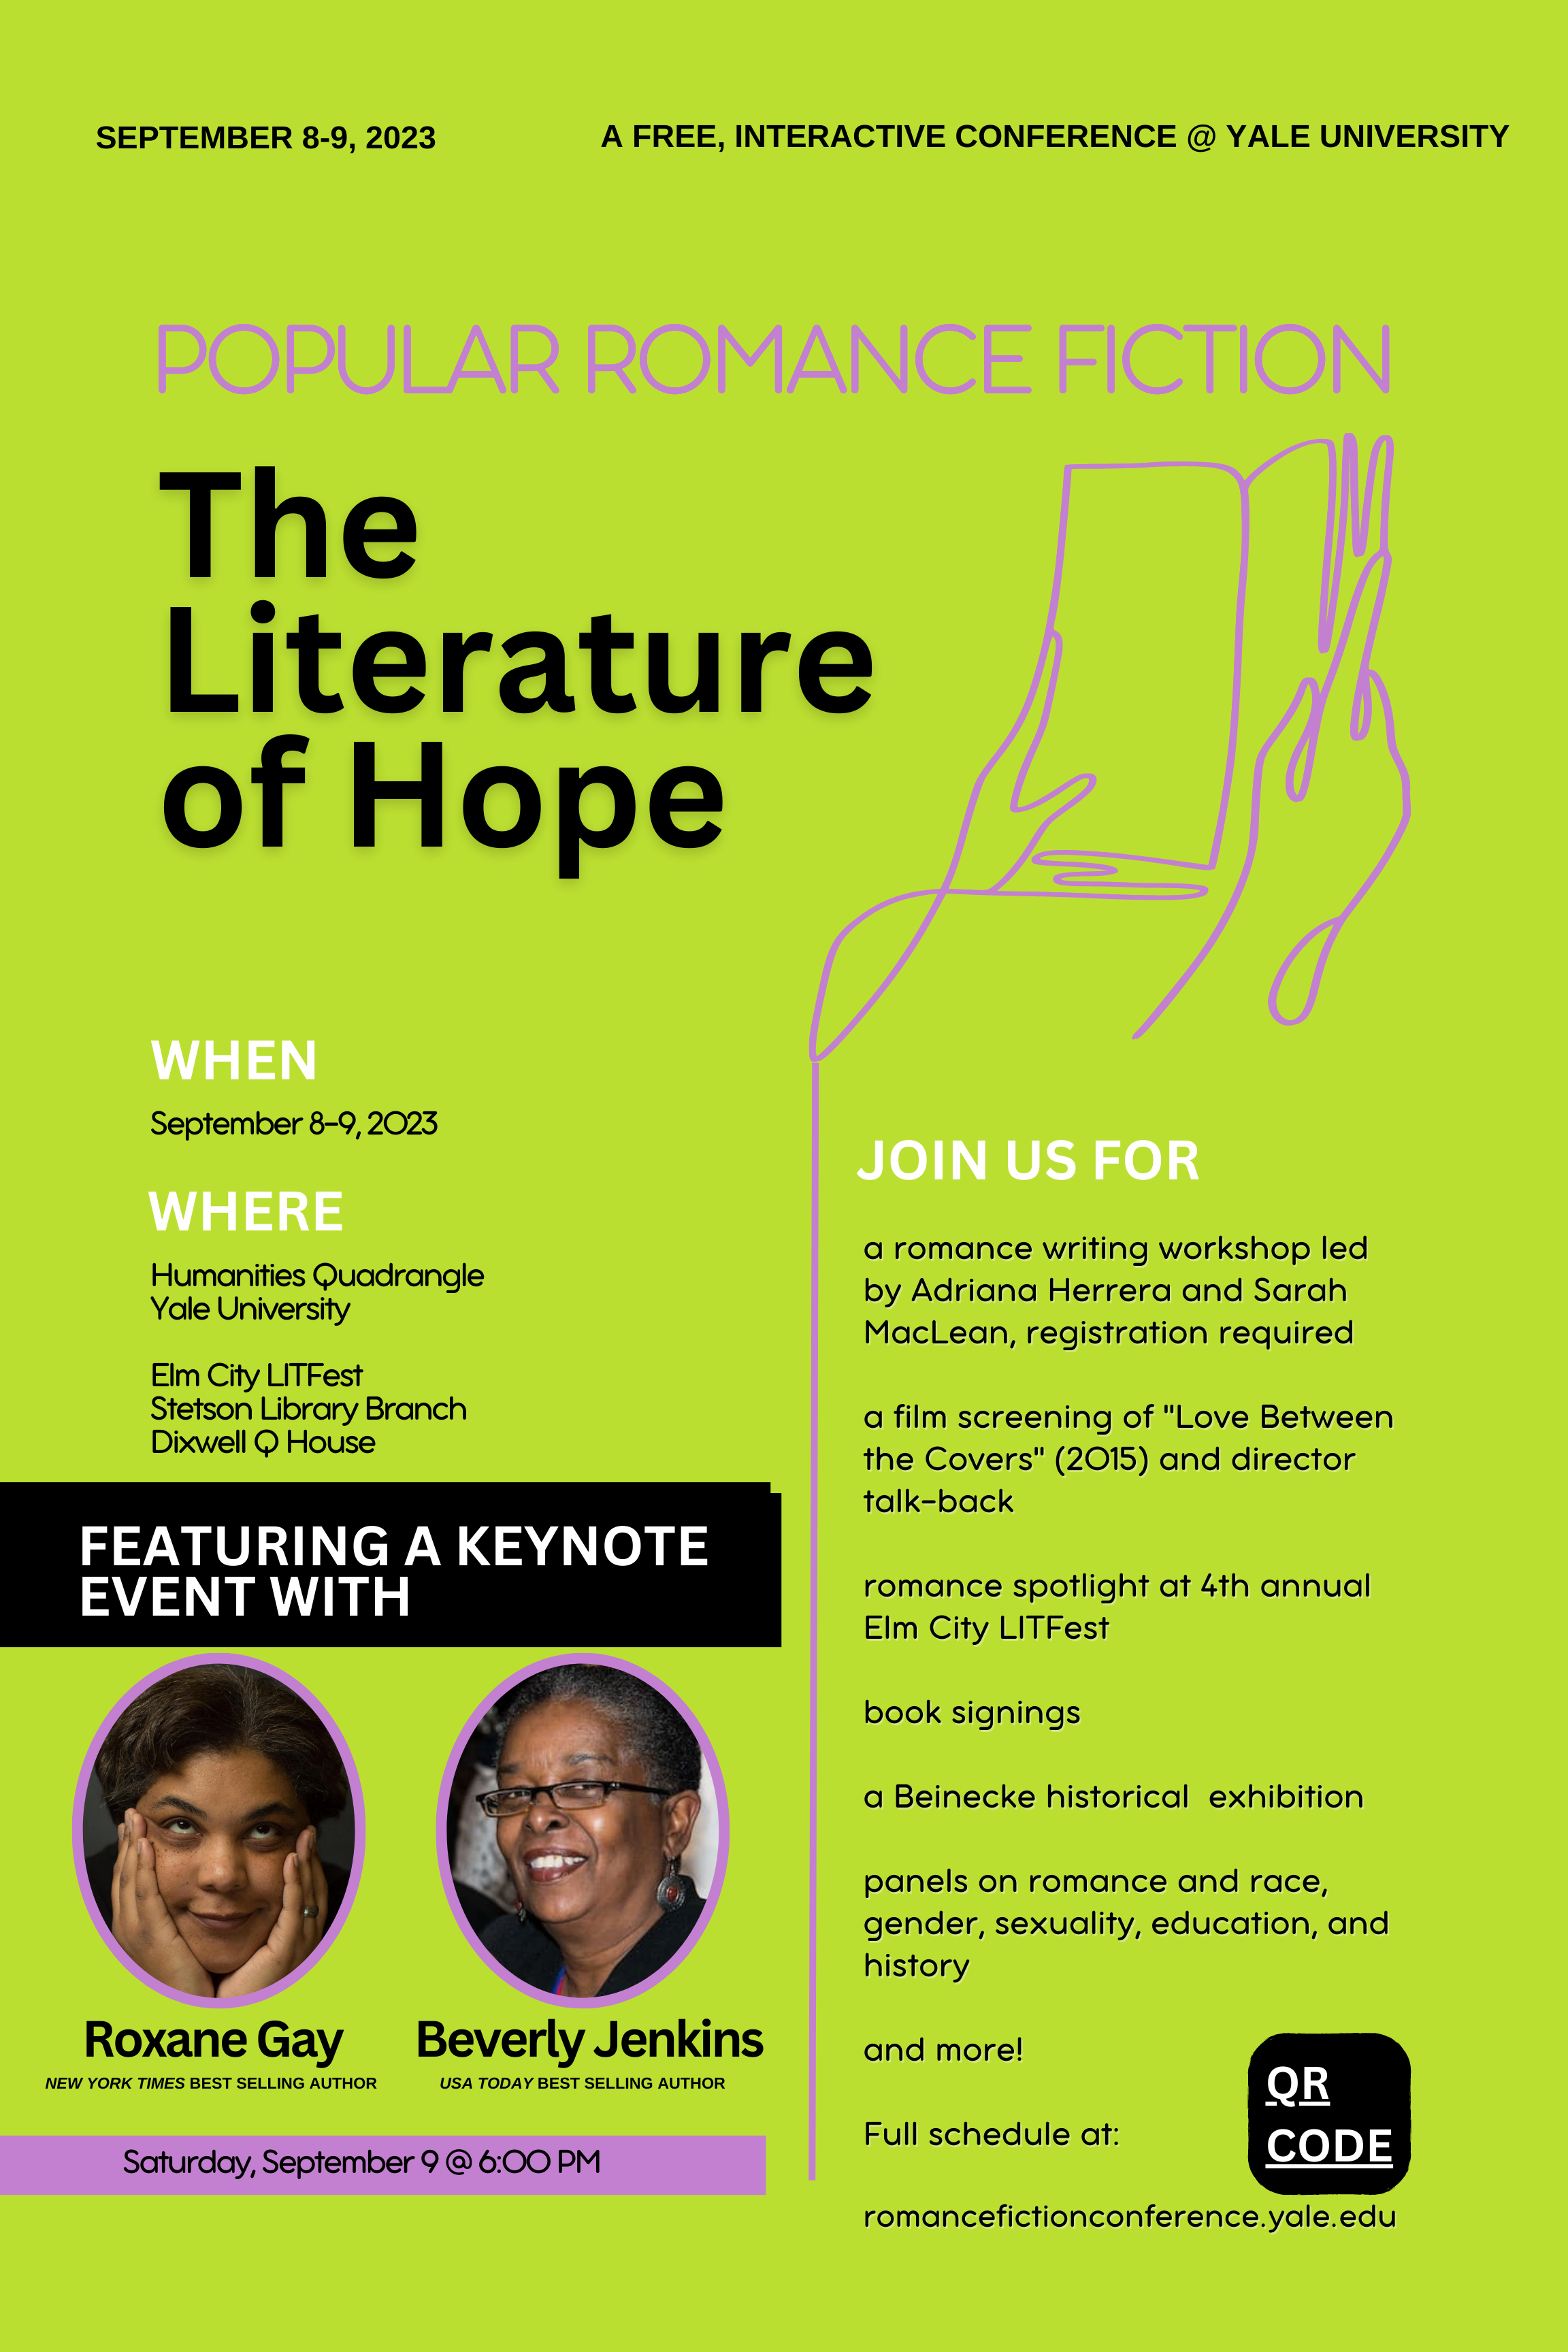 poster for The Literature of Hope conference featuring a pink illustration of hands holding a book over a lime green background, with text about the event details and speakers